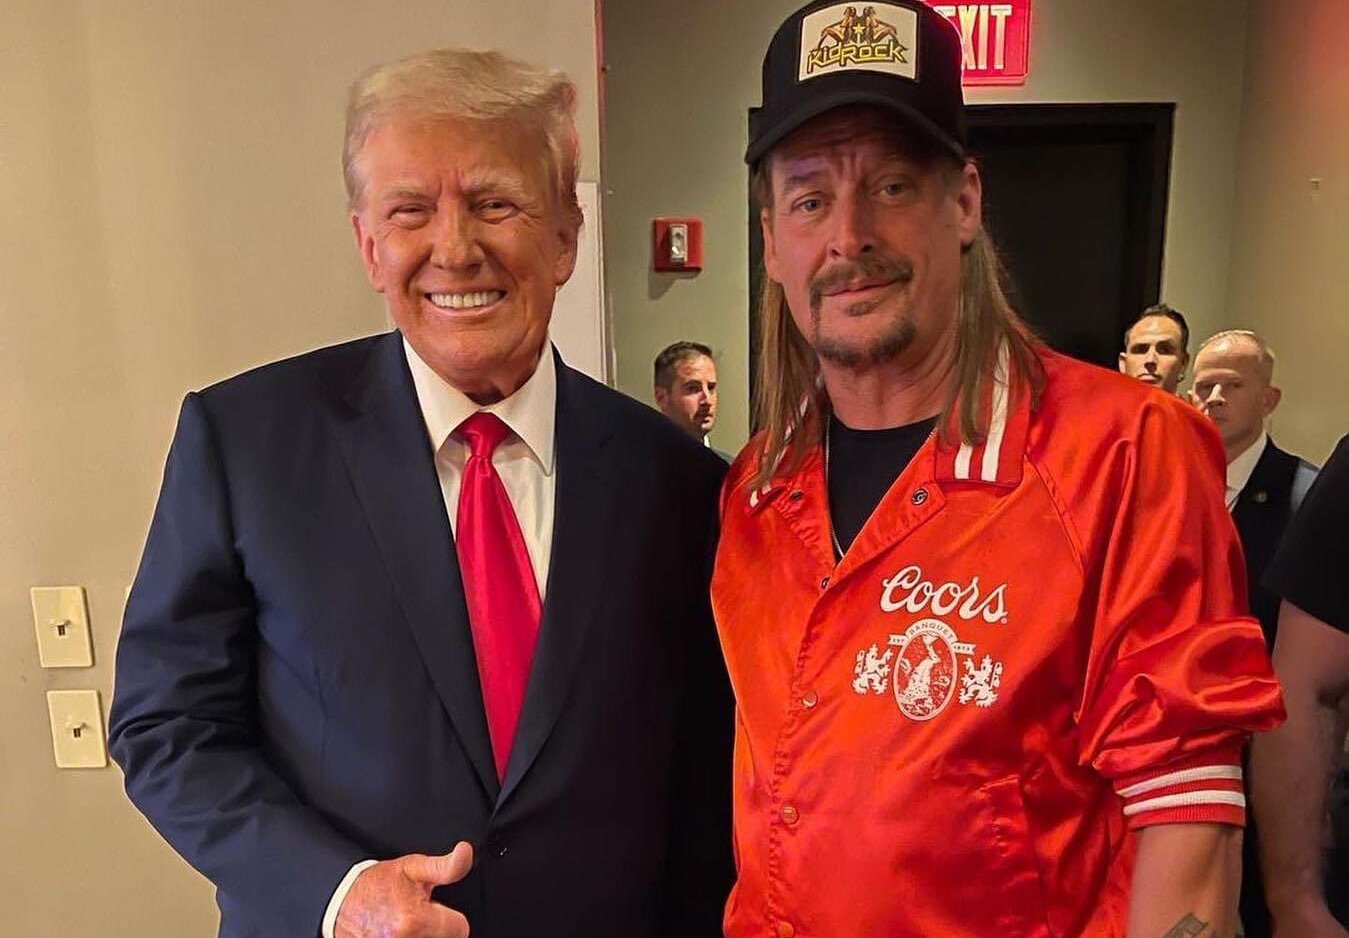 Why Kid Rock is donating $5,000 to Daniel Penny’s defense fund